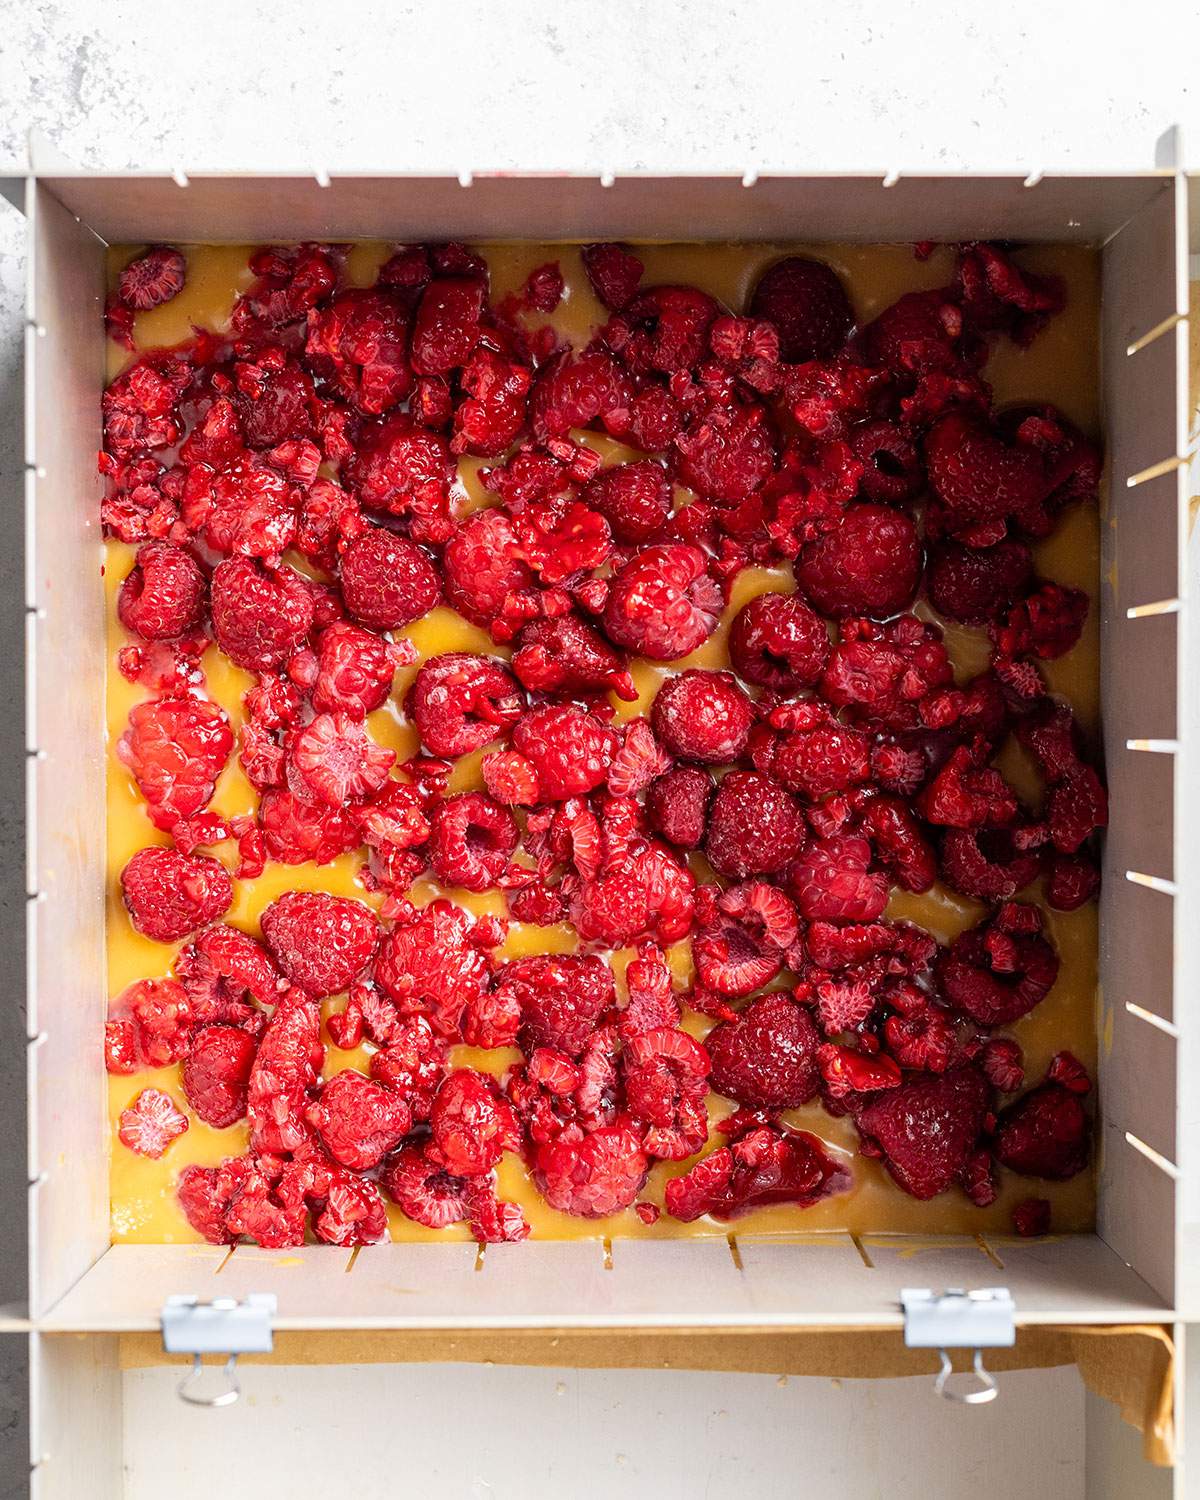 Fresh raspberries have been added on top of the butterscotch and are almost covering up the sauce underneath.